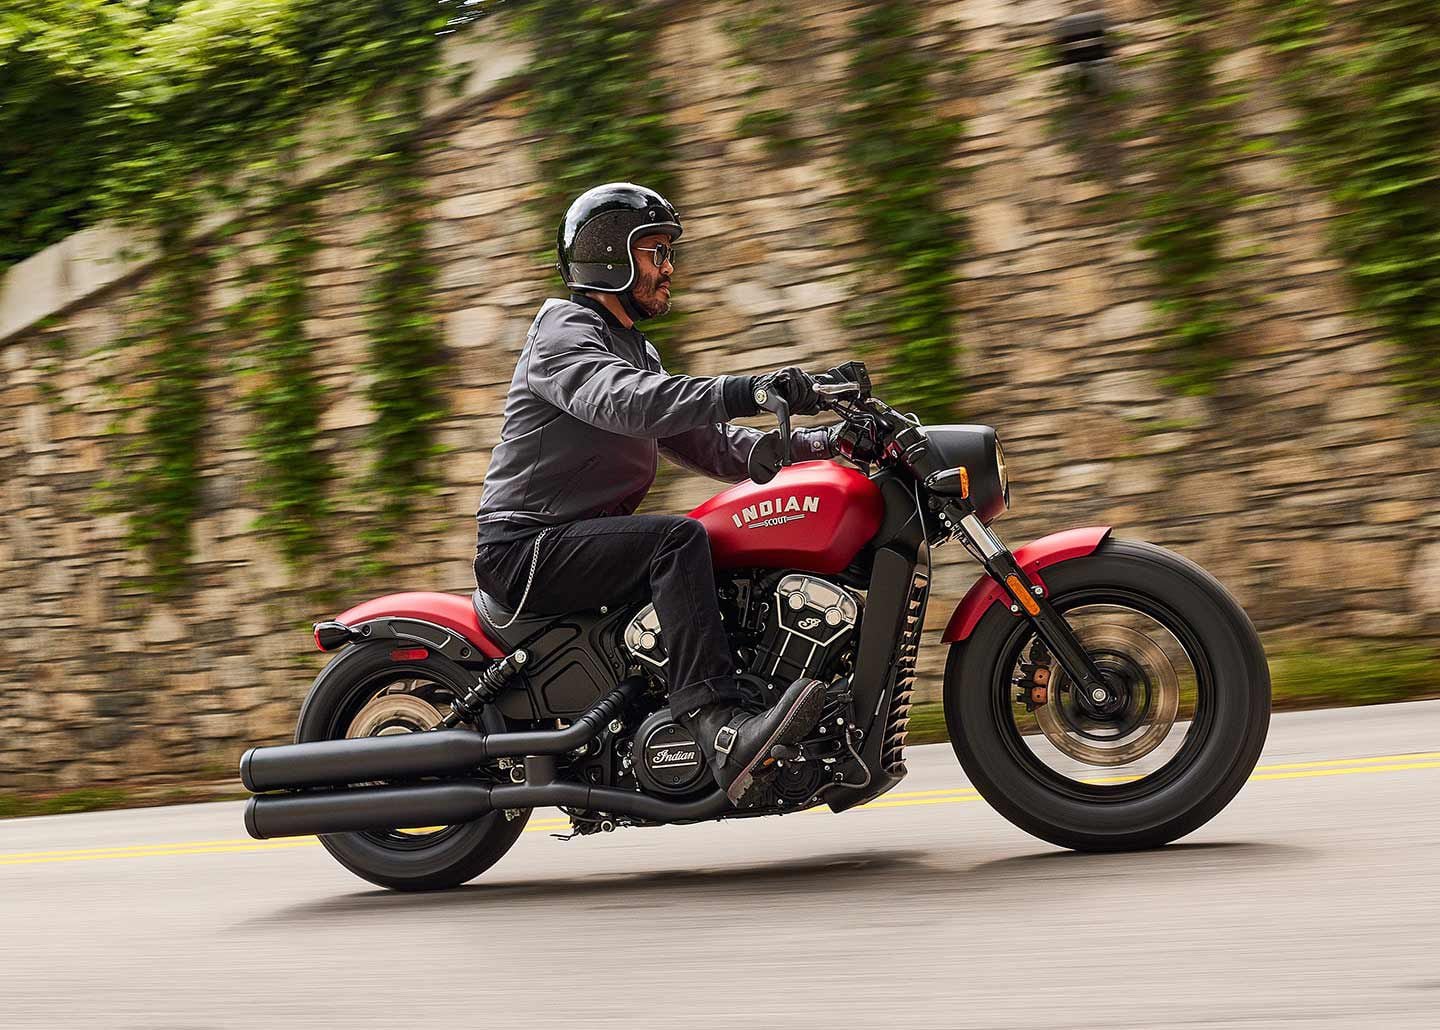 You get the same 69ci V-twin on the Scout Bobber as on the Scout, but with a blacked-out and stripped-down style. Again, there are no changes, and for 2024 the pricier color options are the Indy Red you see here, along with Copper Smoke or Stealth Gray Azure Crystal, all of which come with ABS. Other available colors are Sunset Red Smoke or Springfield Blue Metallic, and Silver Quartz Smoke, Black Smoke, or Sagebrush Smoke. The base model in Black Metallic without ABS goes for $12,249.